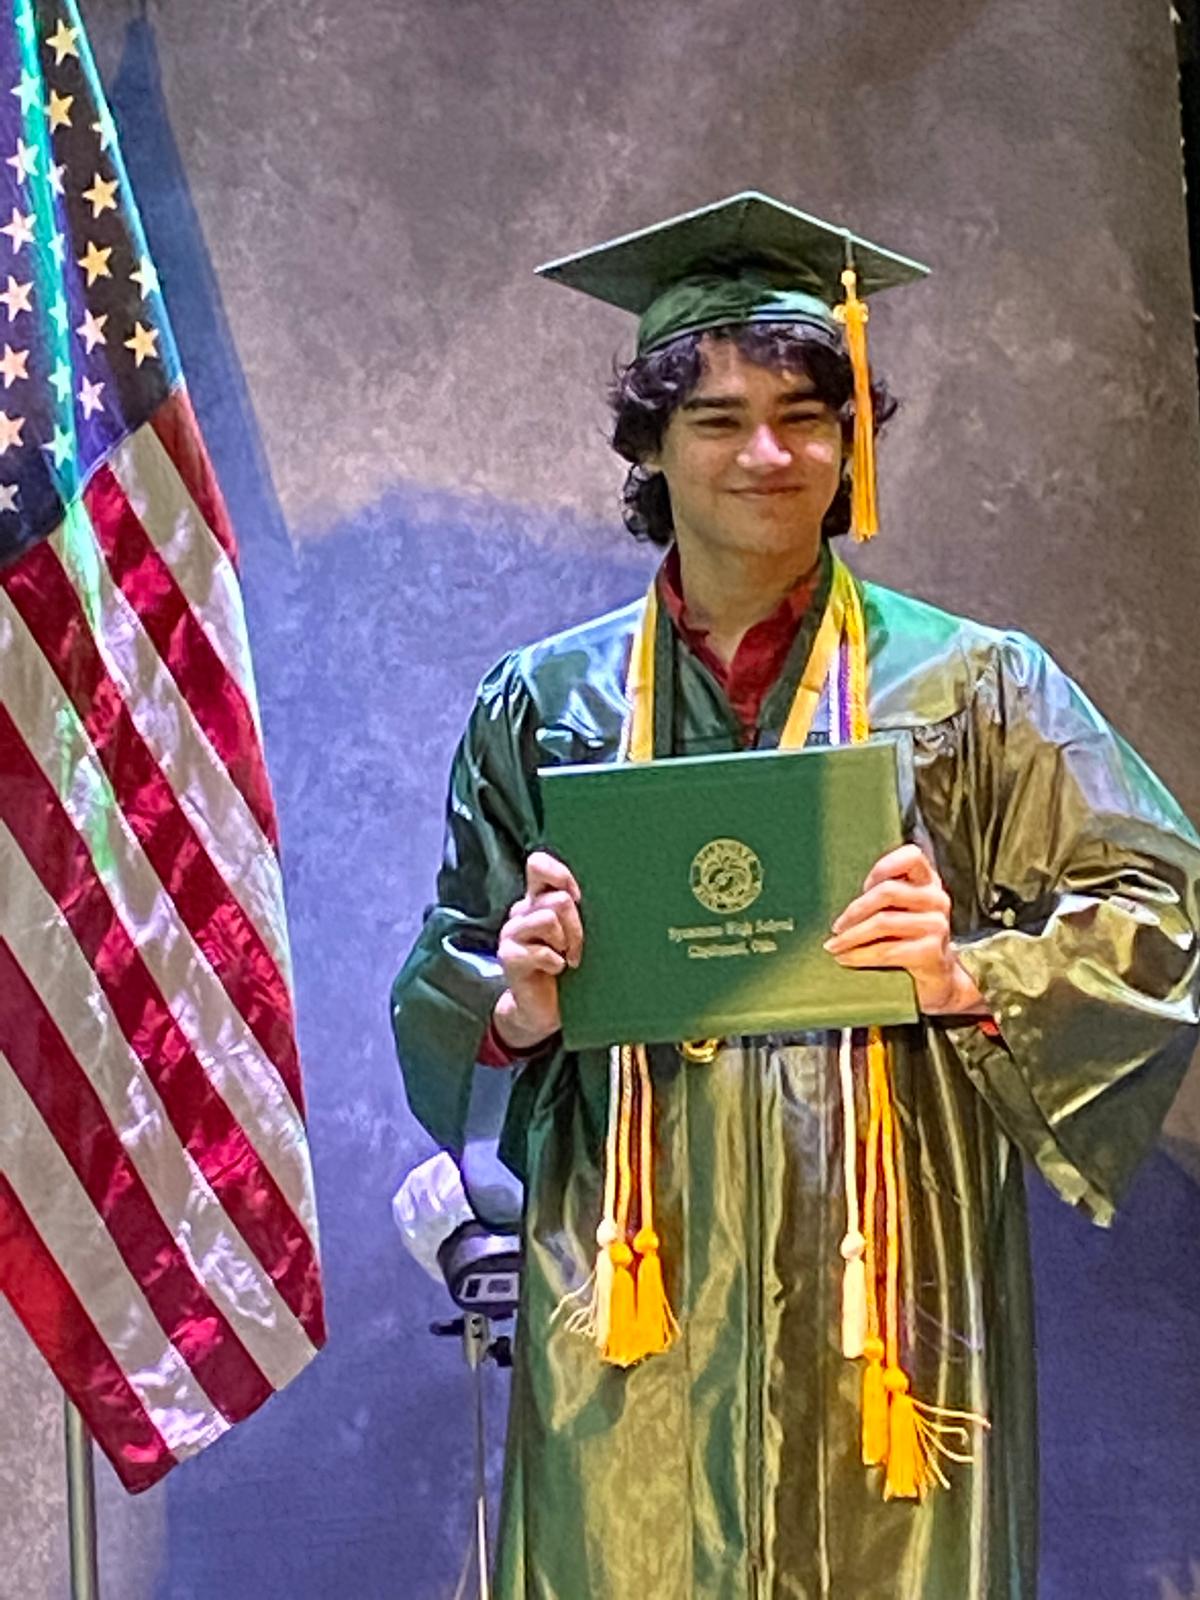 Kamran graduated from high school with honors at age 17. (Courtesy of <a href="https://www.facebook.com/winterwolfpublications">Tracy Ross</a>)